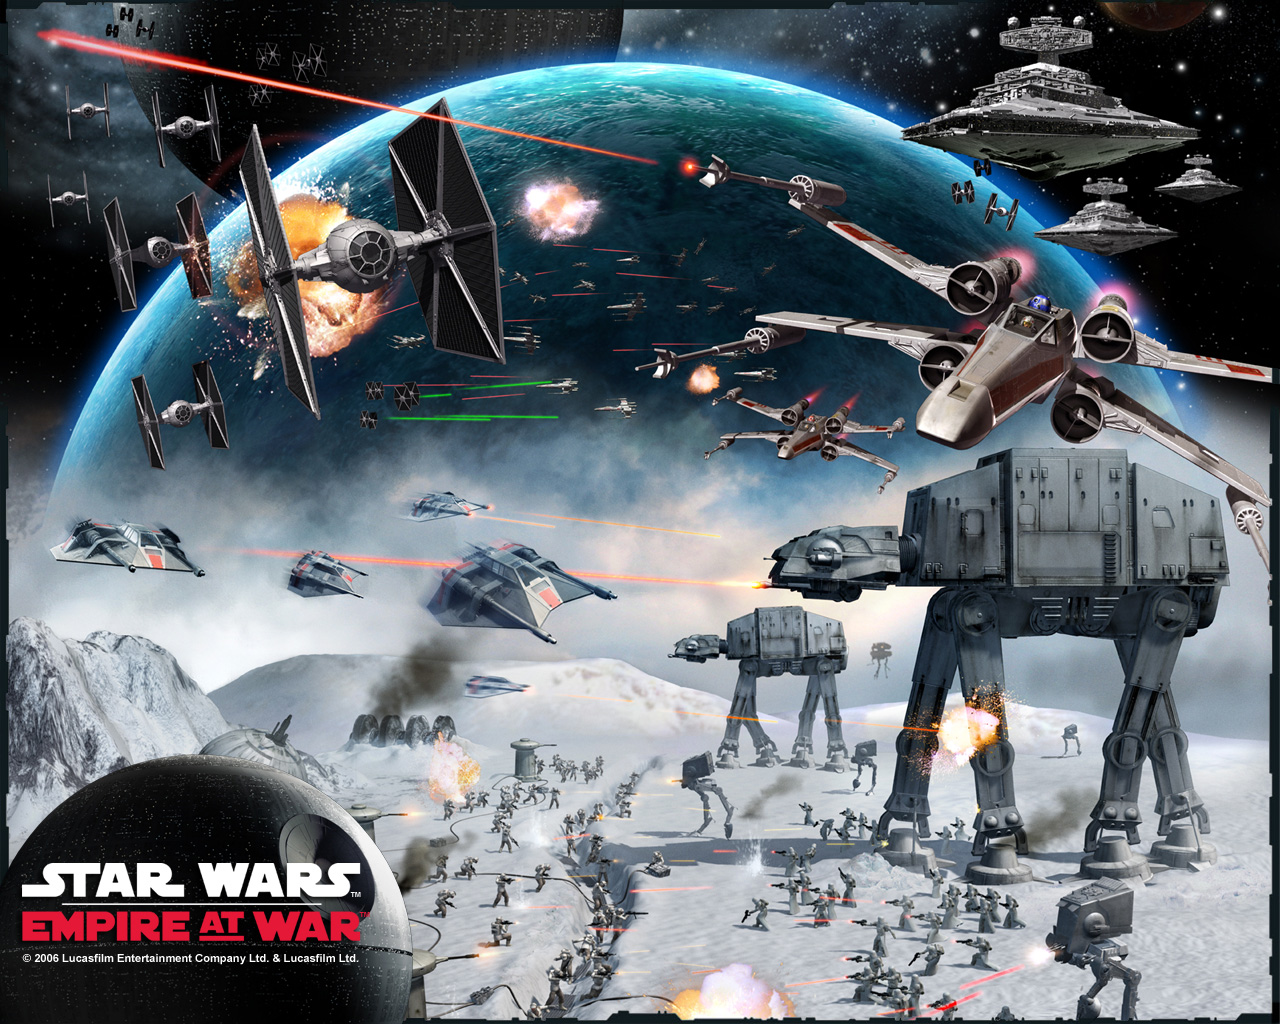 star destroyer, star wars: empire at war, video game, at at walker, star wars, tie fighter, x wing images